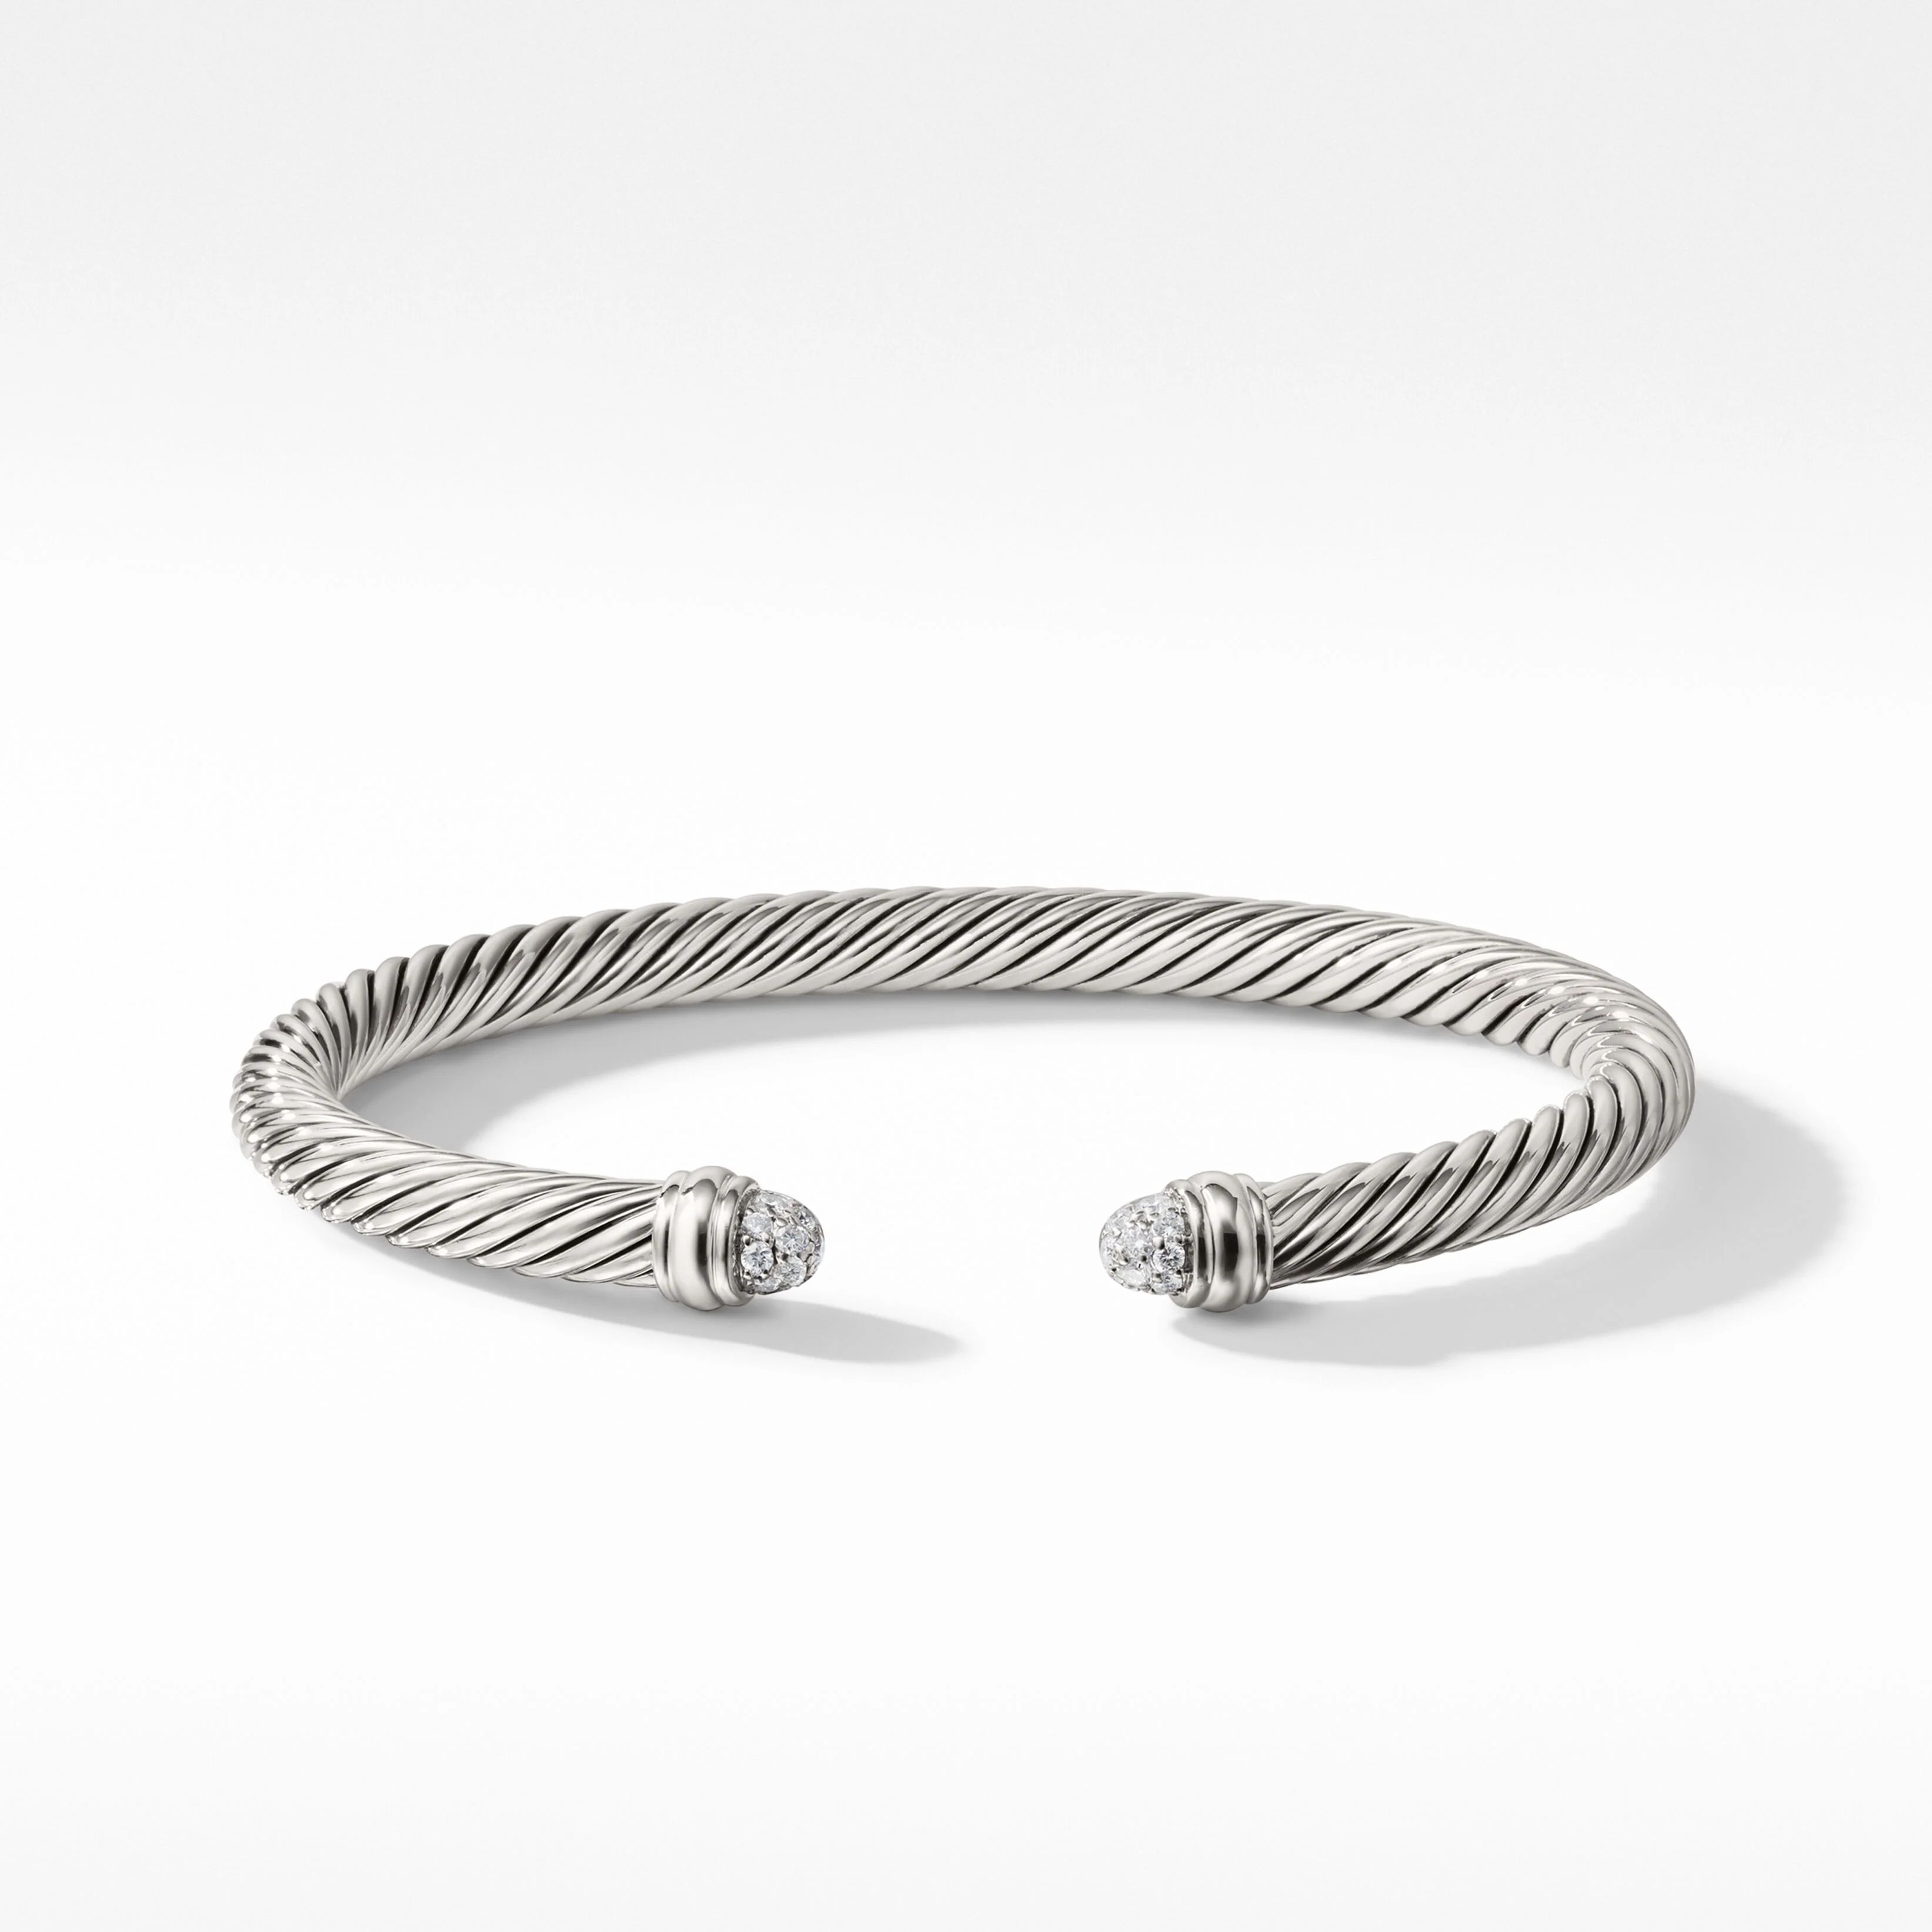 Cable Classics Bracelet in Sterling Silver with Pavé Diamond Domes | David Yurman